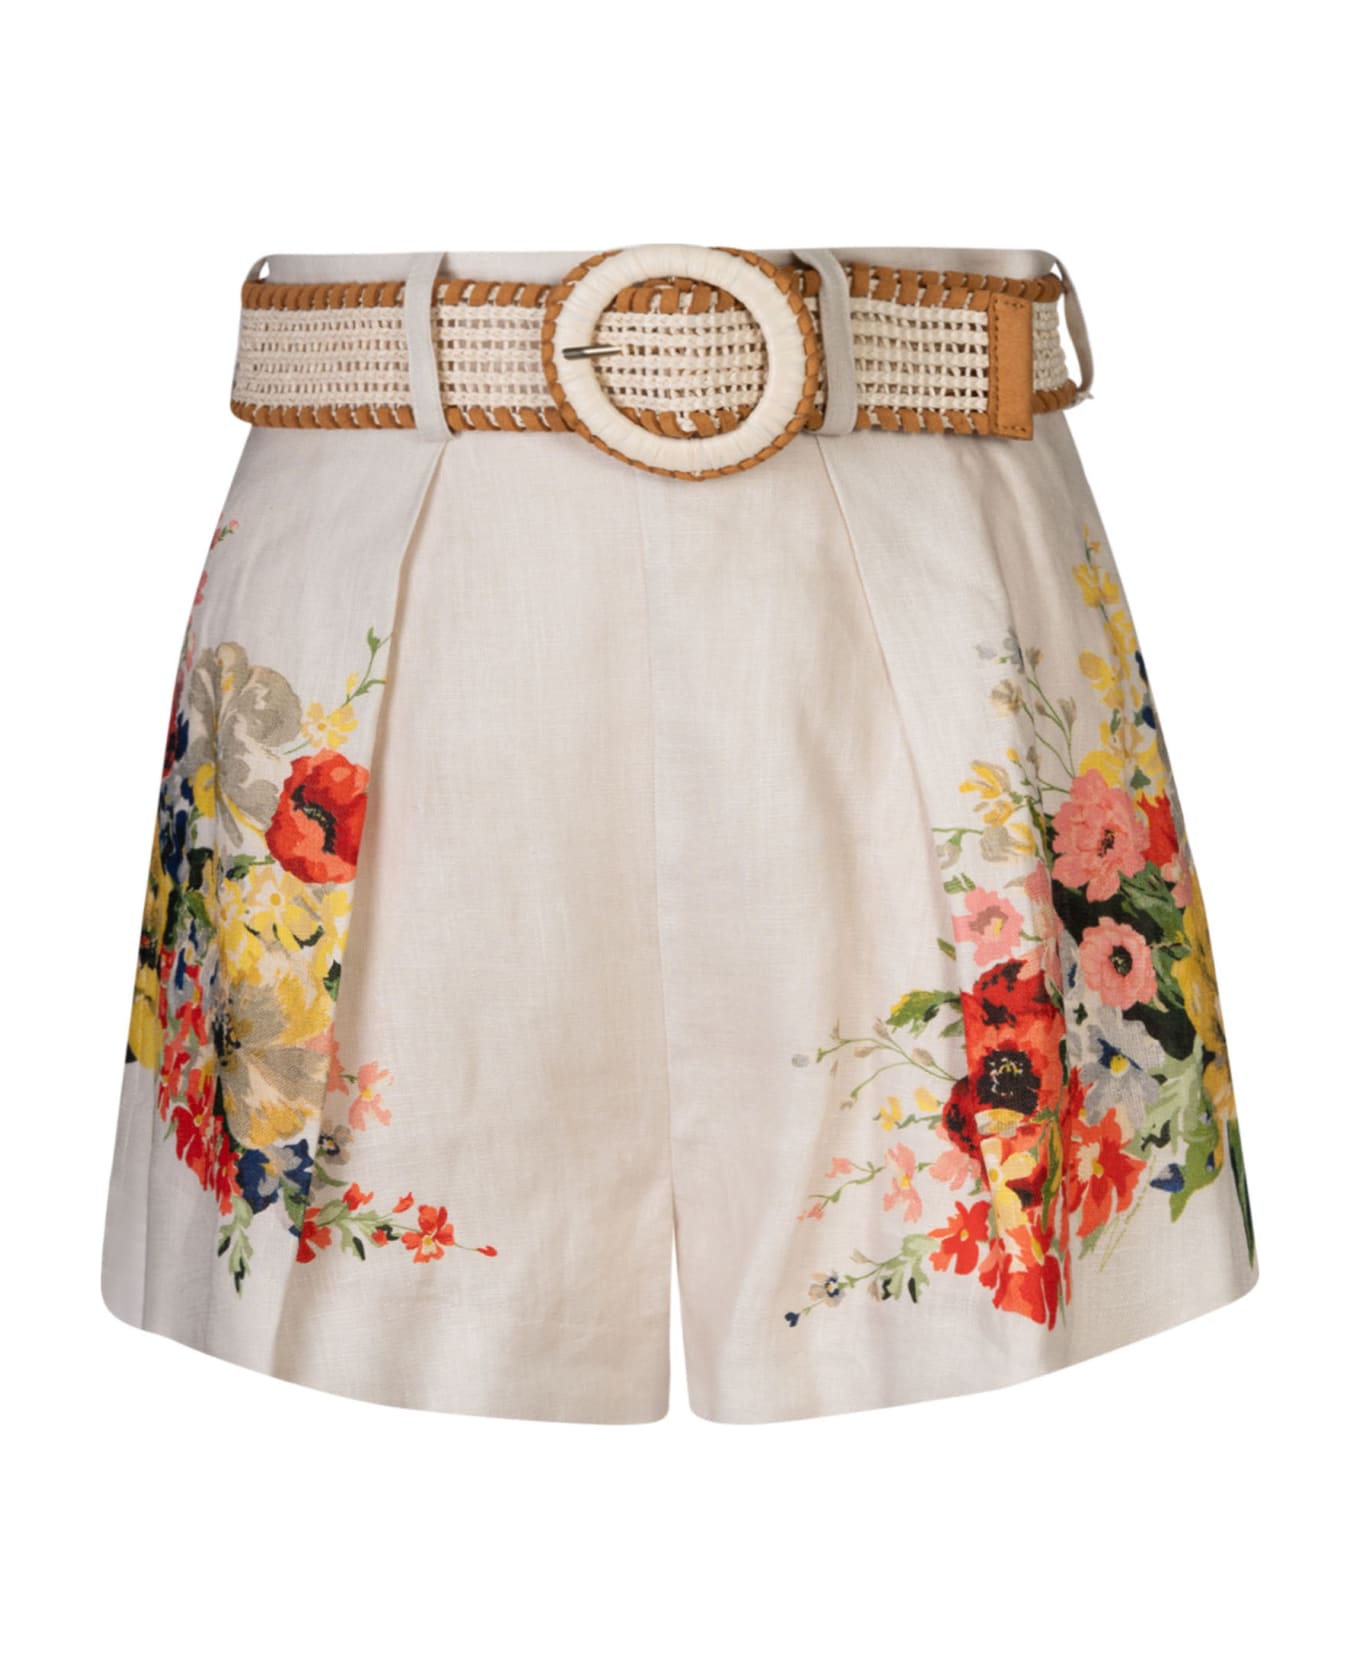 Zimmermann Alight Tuch Shorts - Ivory Floral